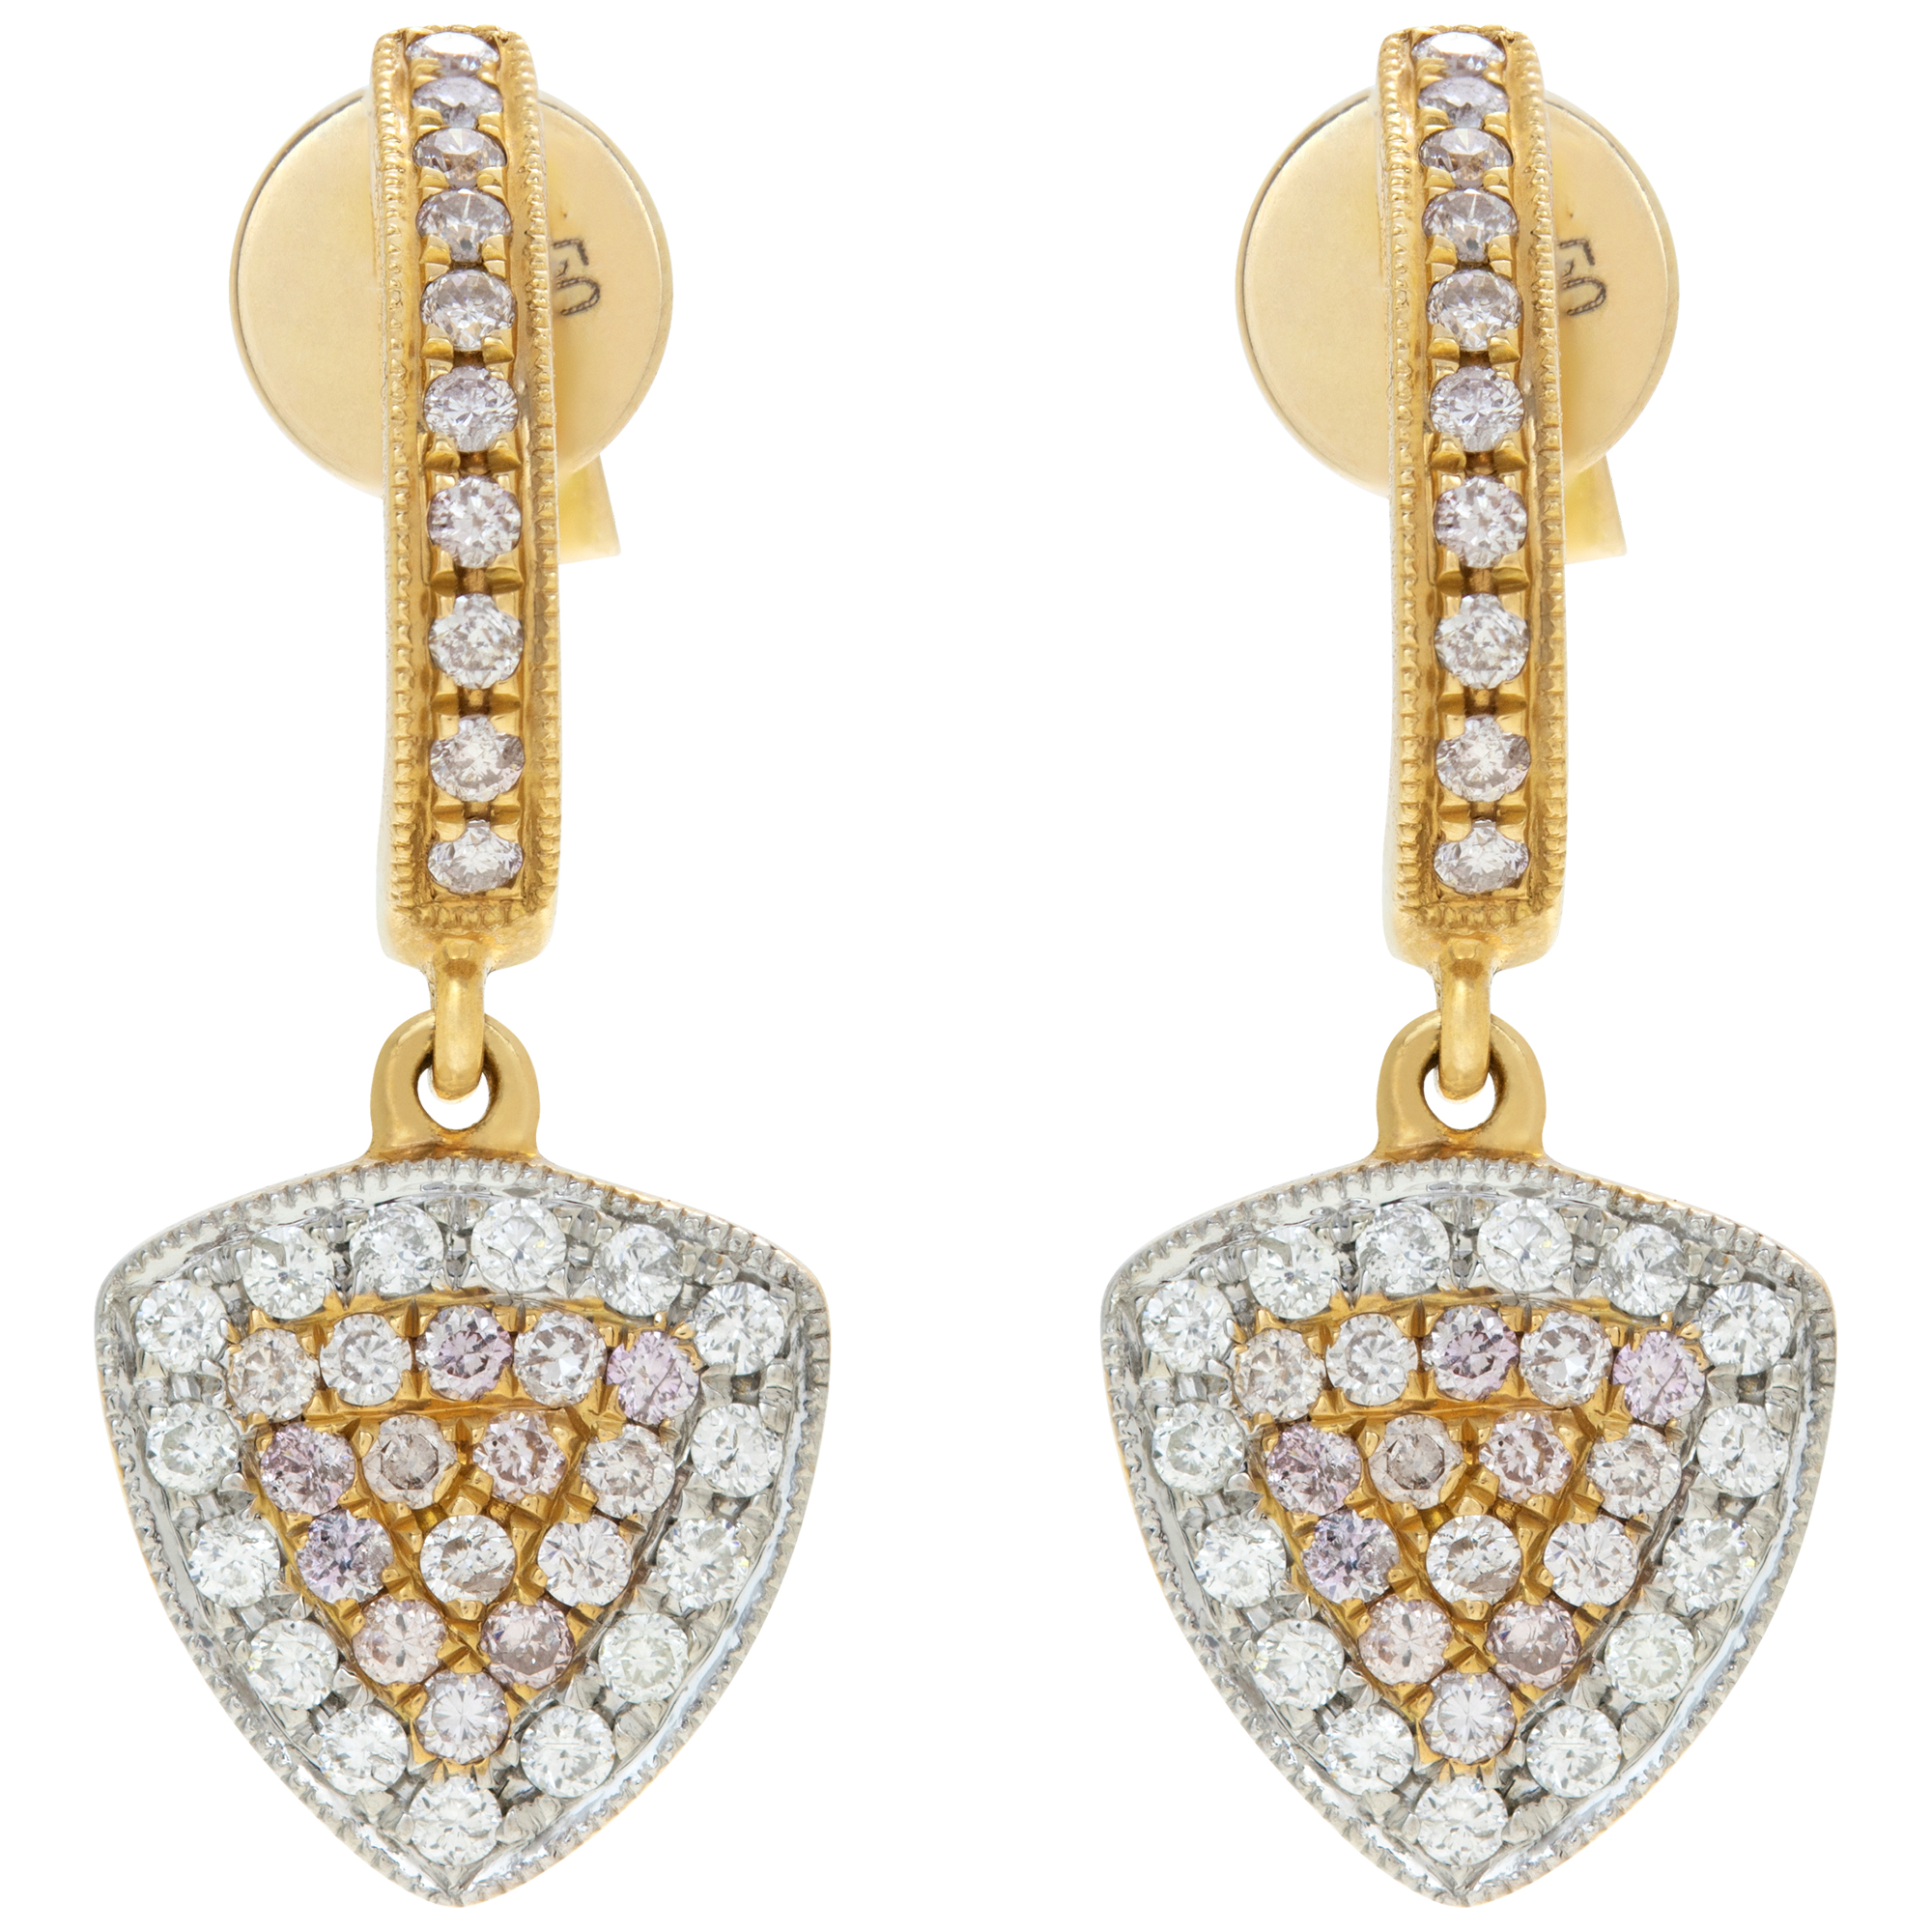 Yellow and white diamond earrings in 18k white & yellow gold